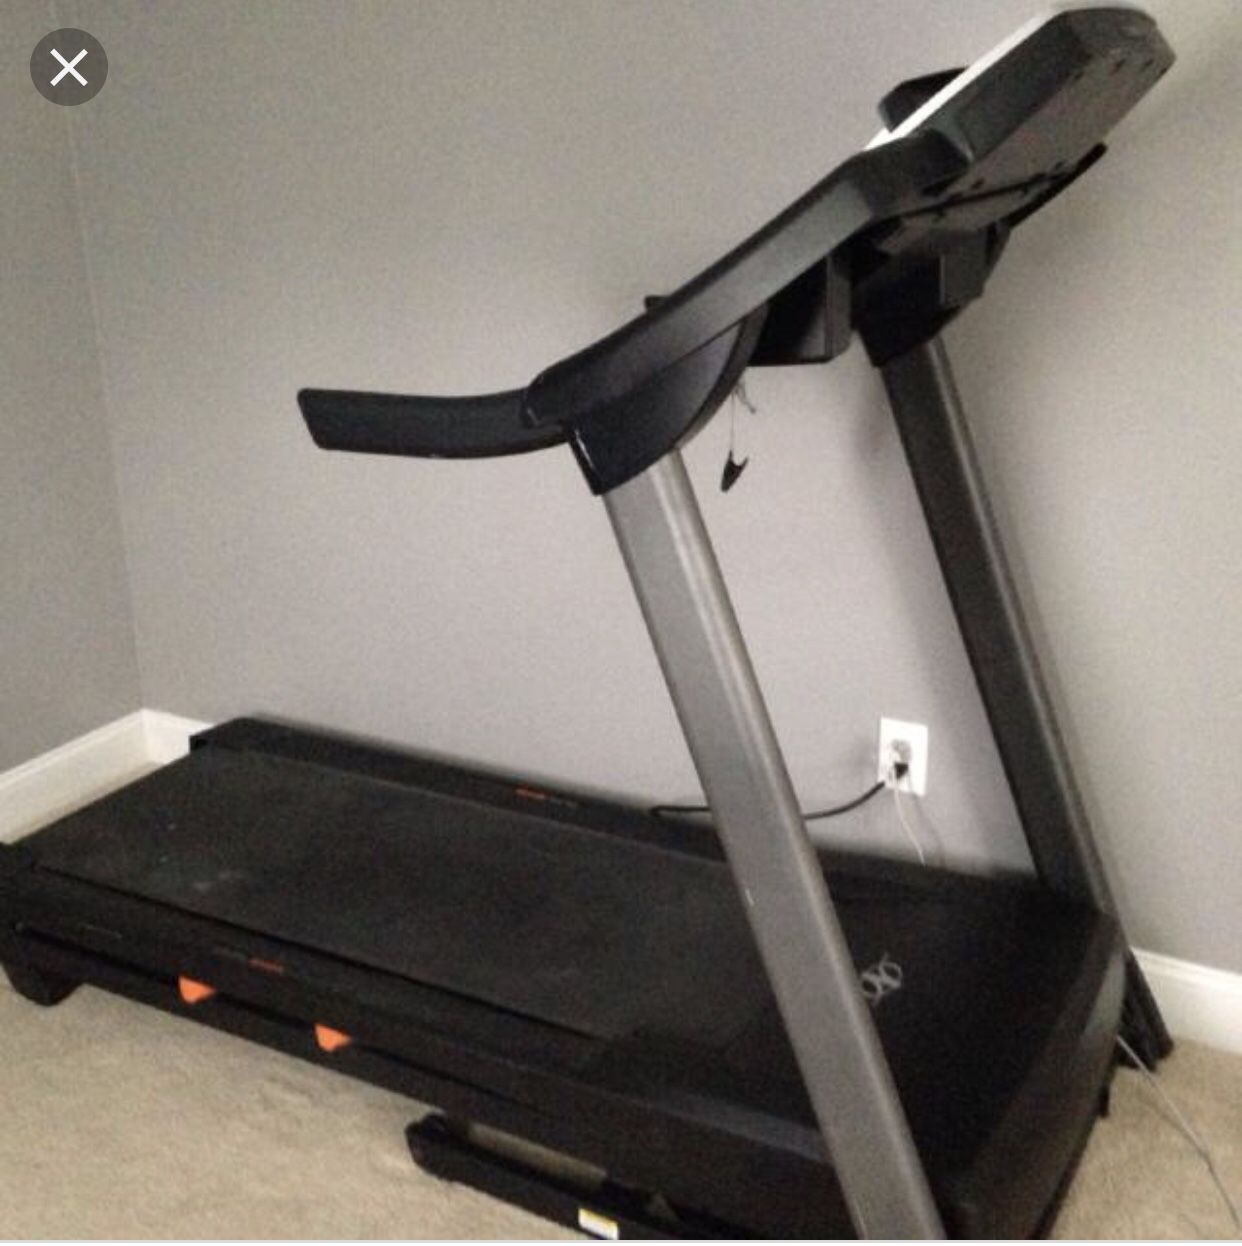 NordicTrack T5.5 treadmill w/ ifit live powered by google play